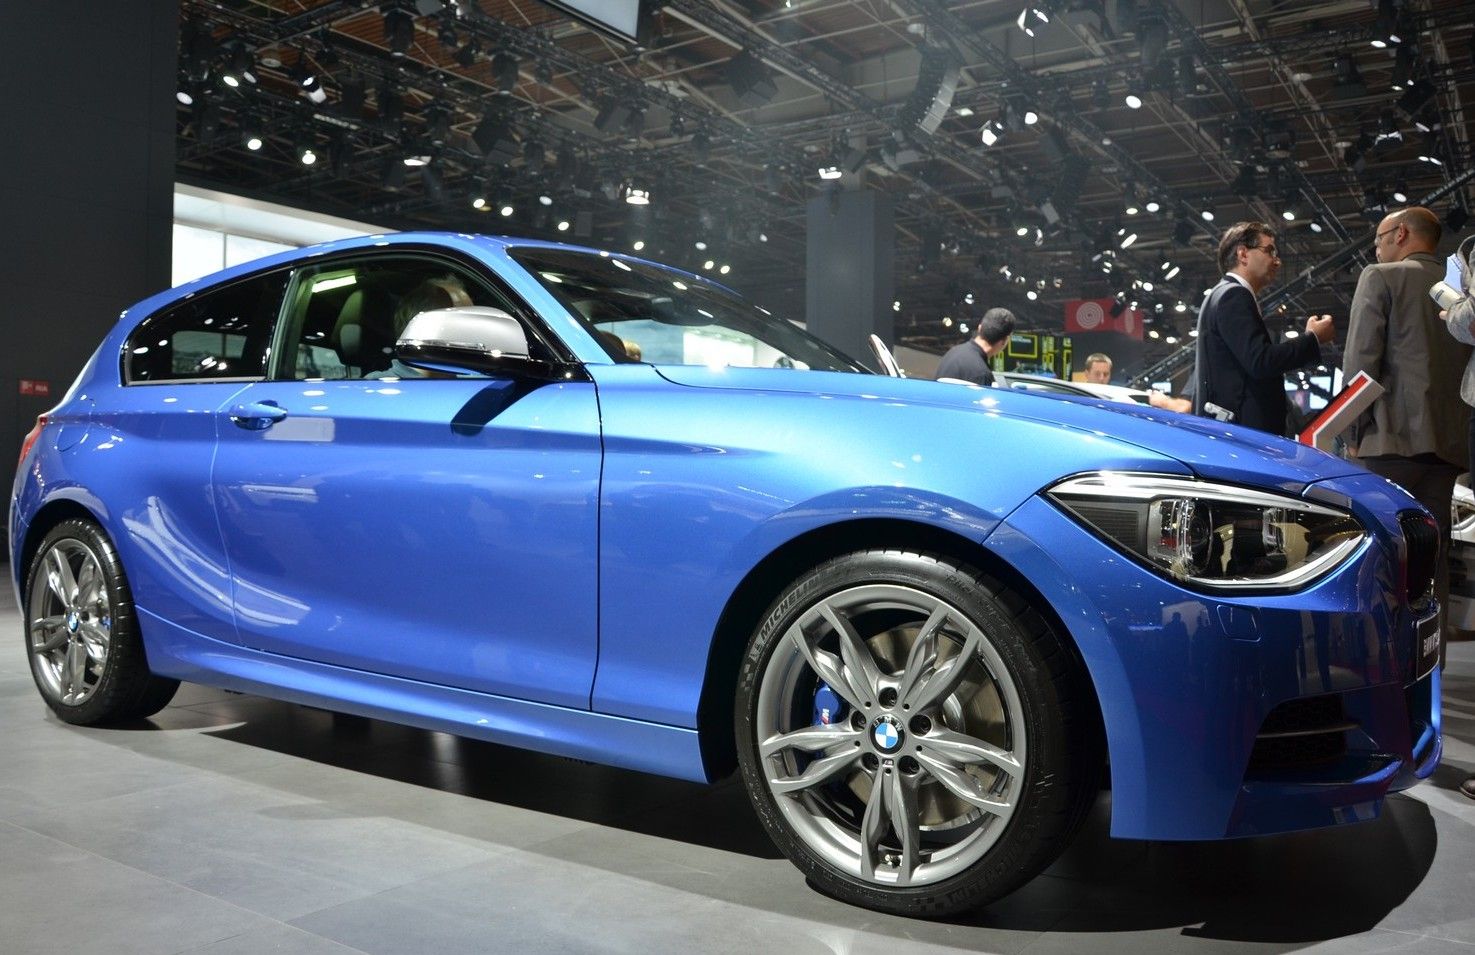 Featured Image of 2012 BMW M135i XDrive At Paris Motor Show